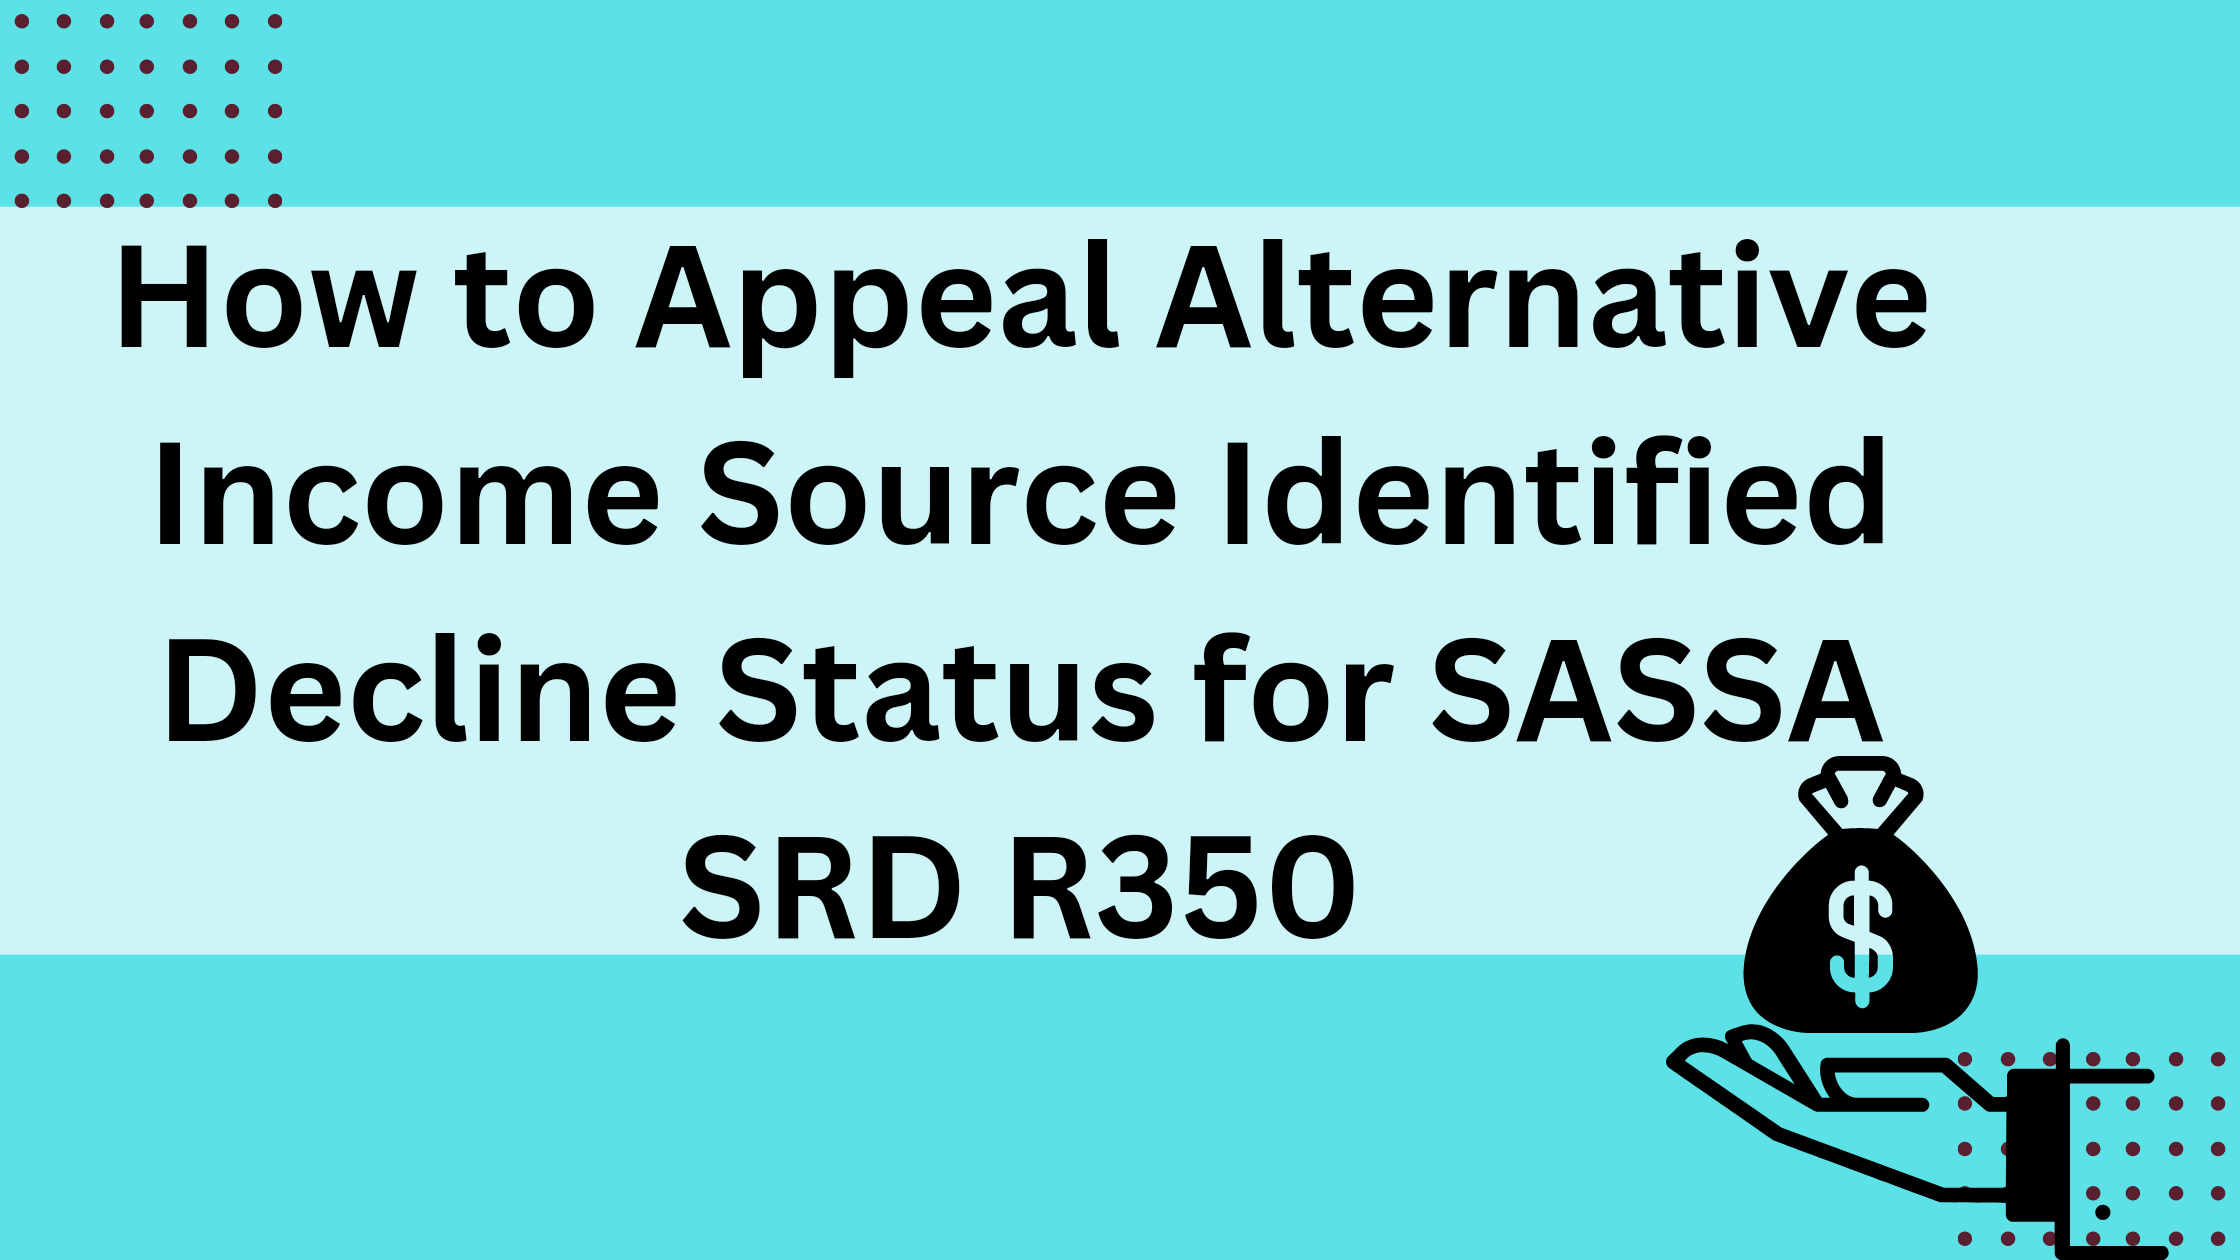 How to Appeal Alternative Income Source Identified Decline Status for SASSA SRD R350